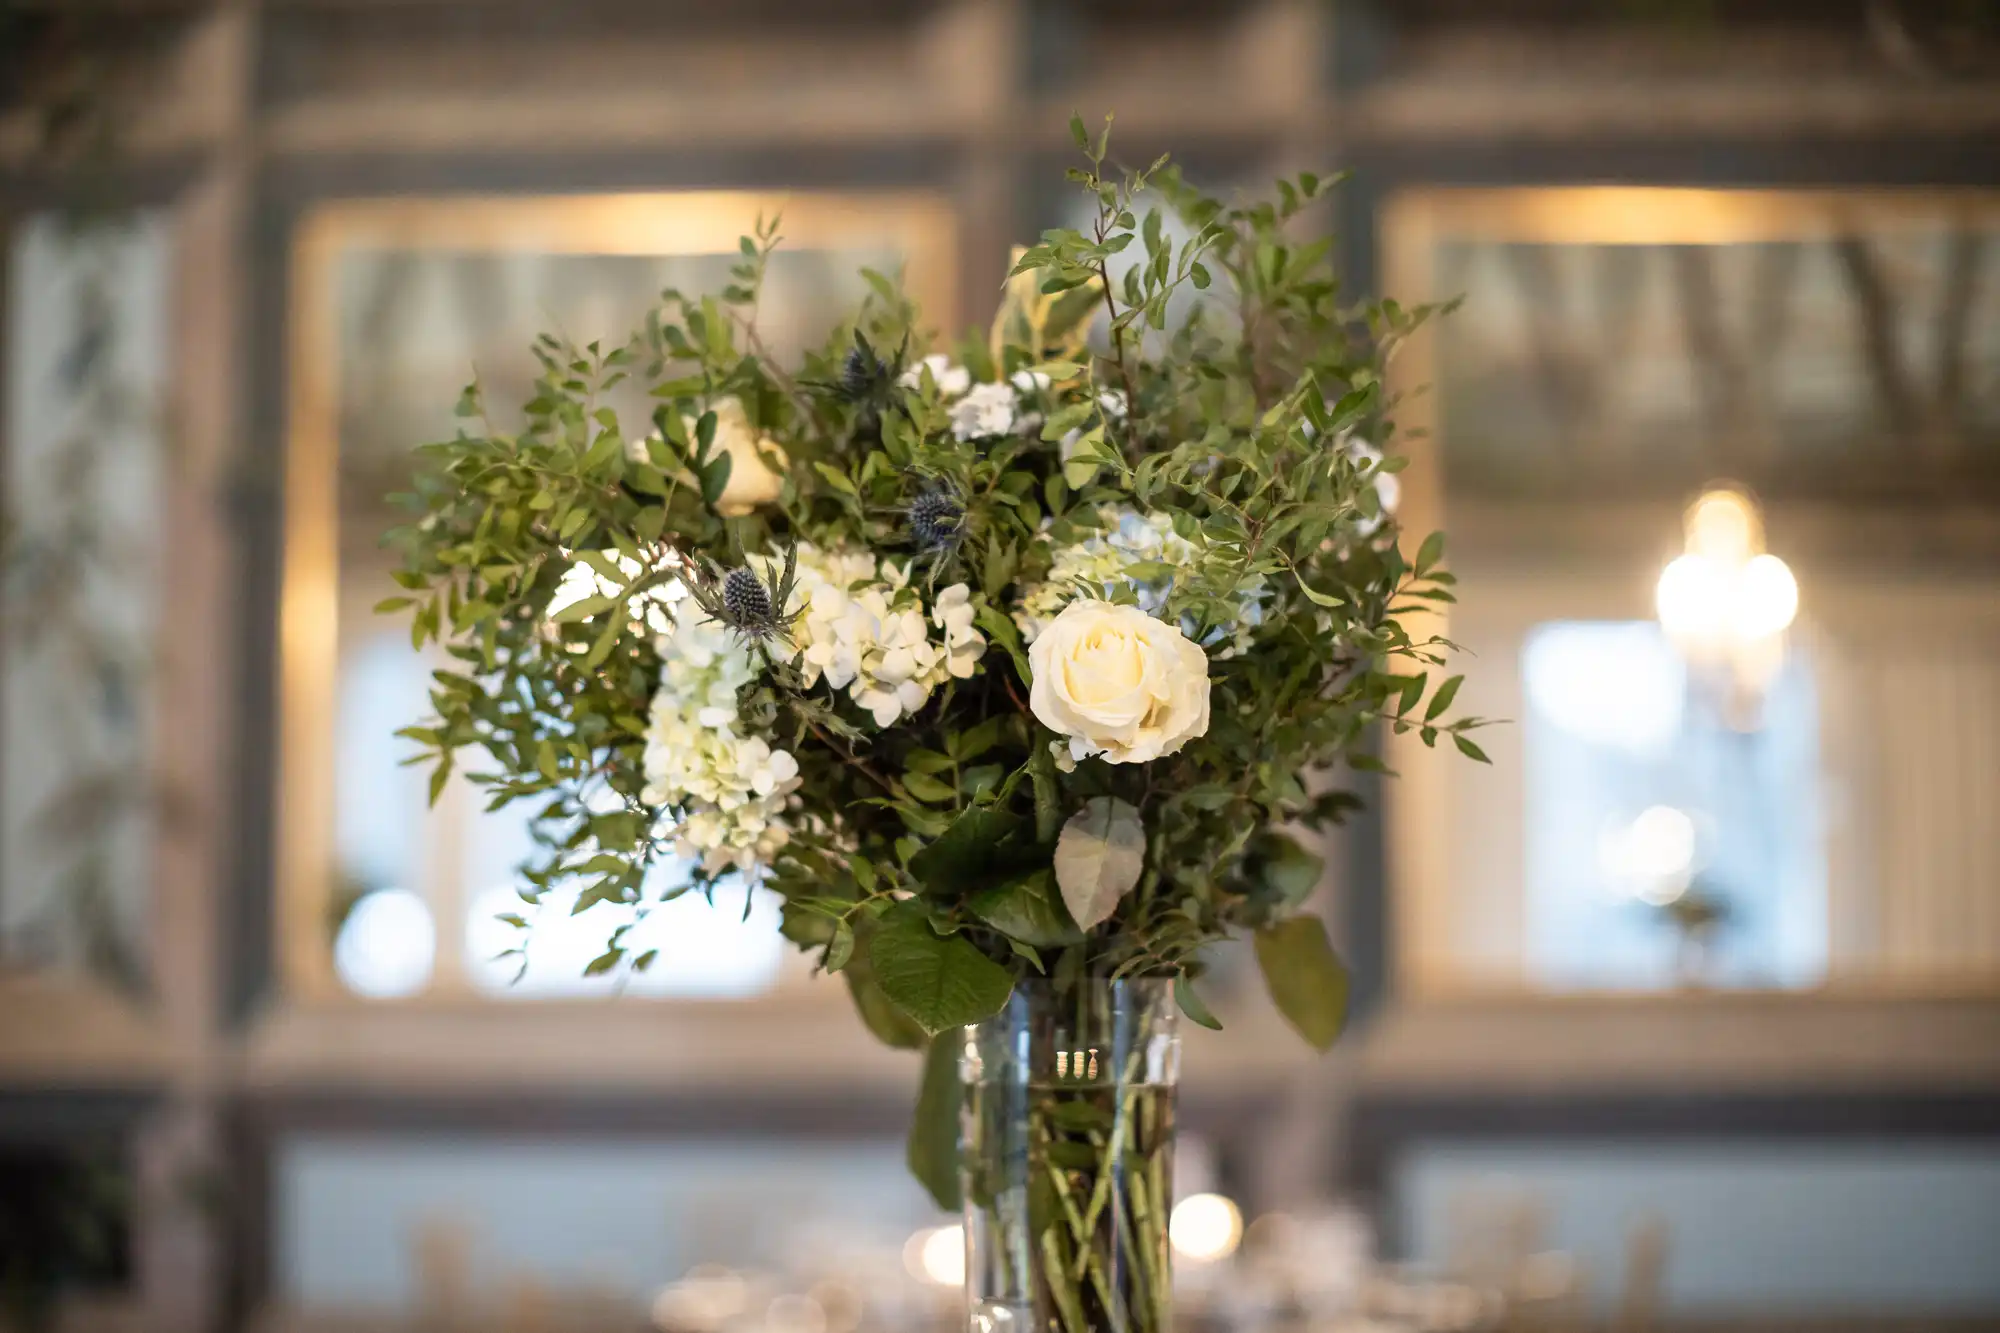 A vase with a mixed floral bouquet, including white roses and greenery, is placed on a table. There are mirrors and blurred lights in the background.